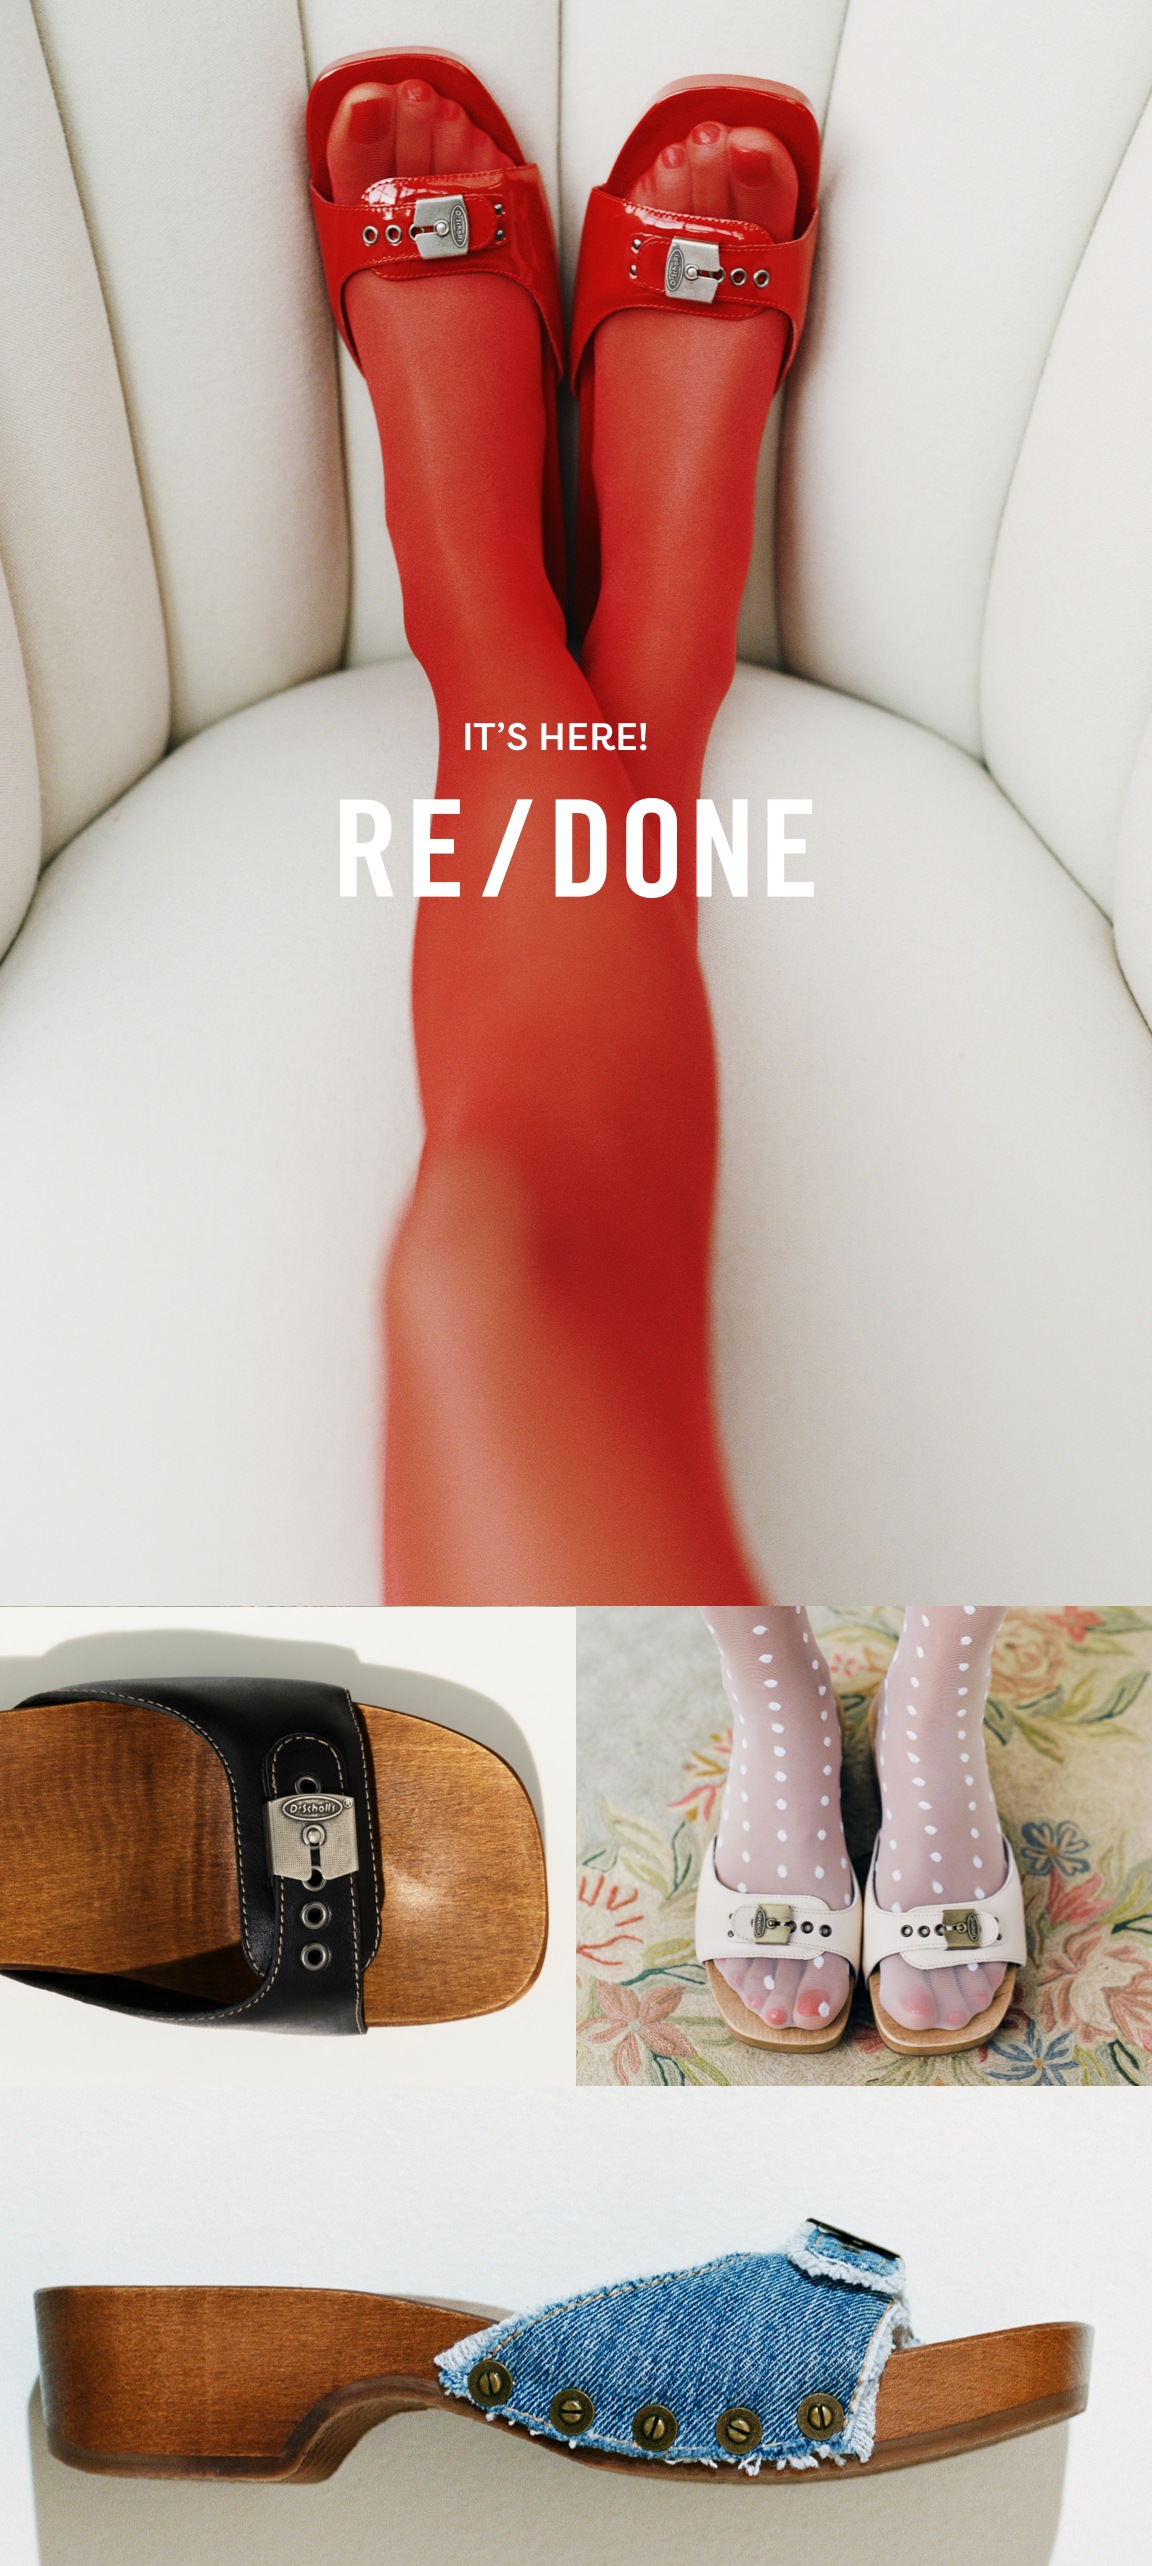 REDONE & Dr. Scholl's Shoes collaboration